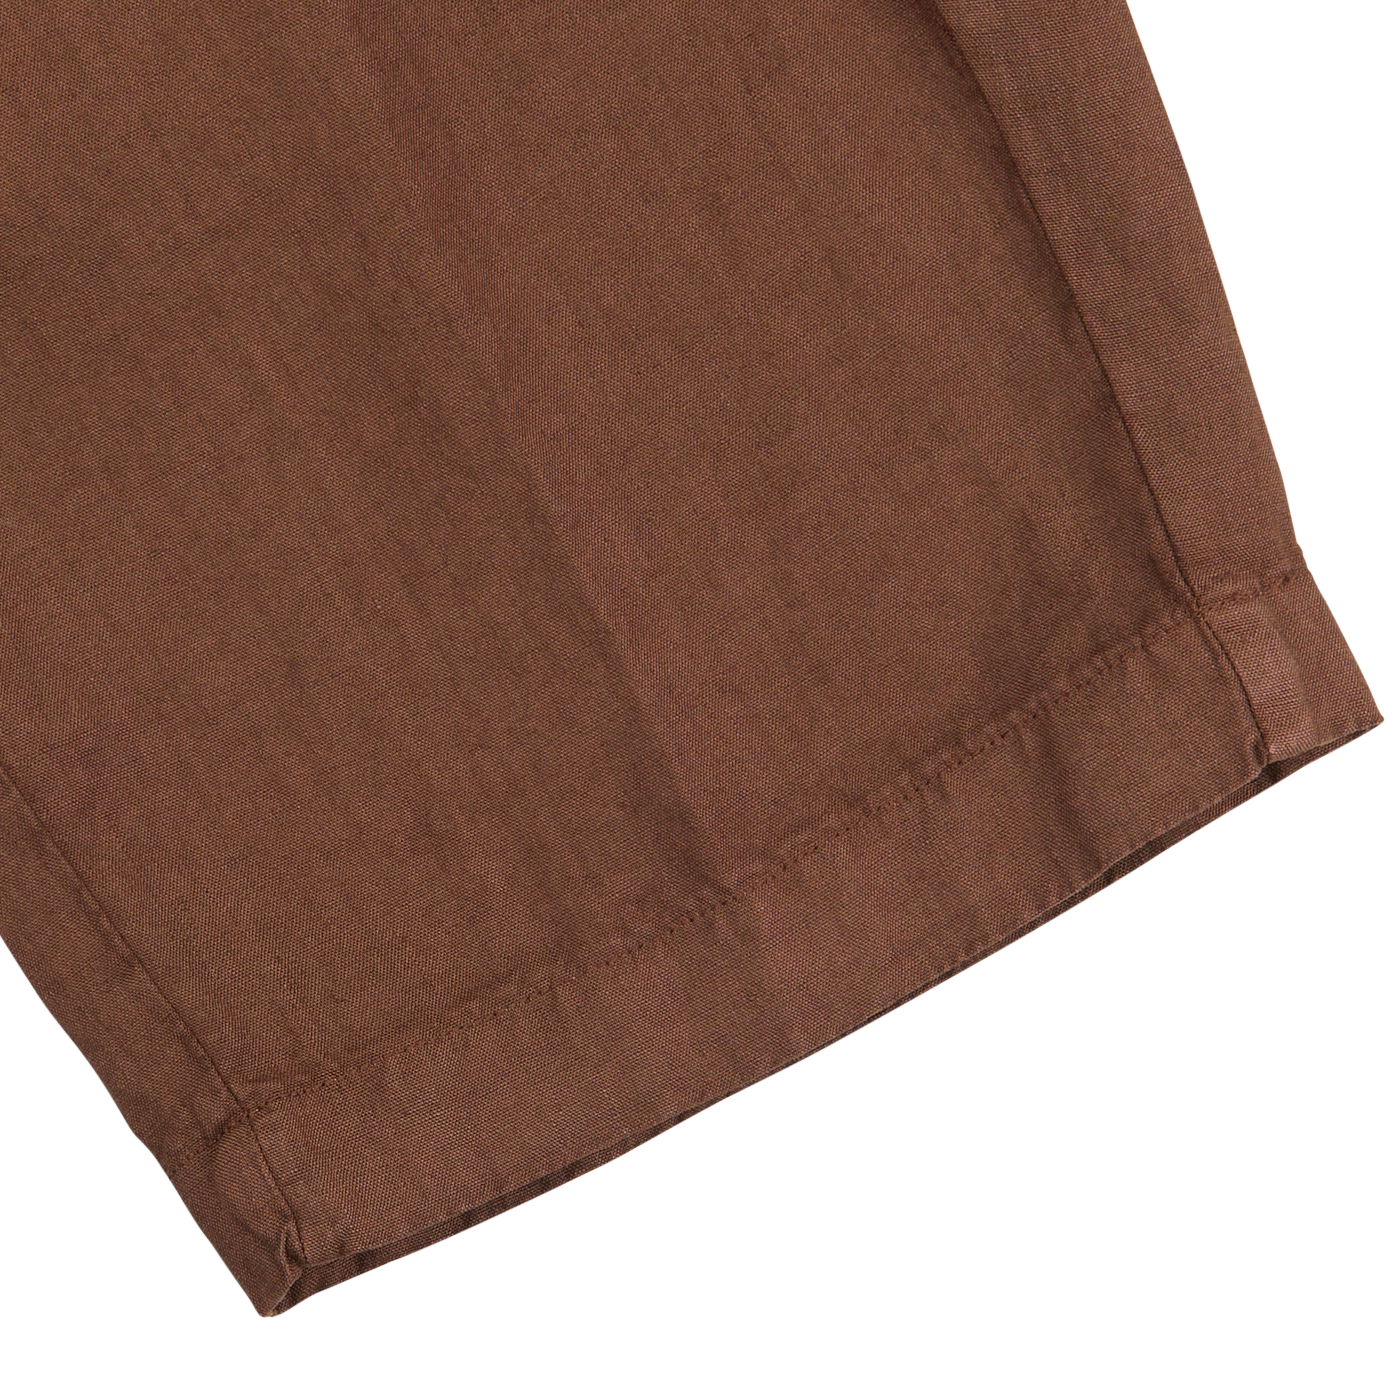 A close-up of Berwich's Terra Brown Washed Linen Drawstring Shorts, highlighting the texture and hem detail of the material against a white background.